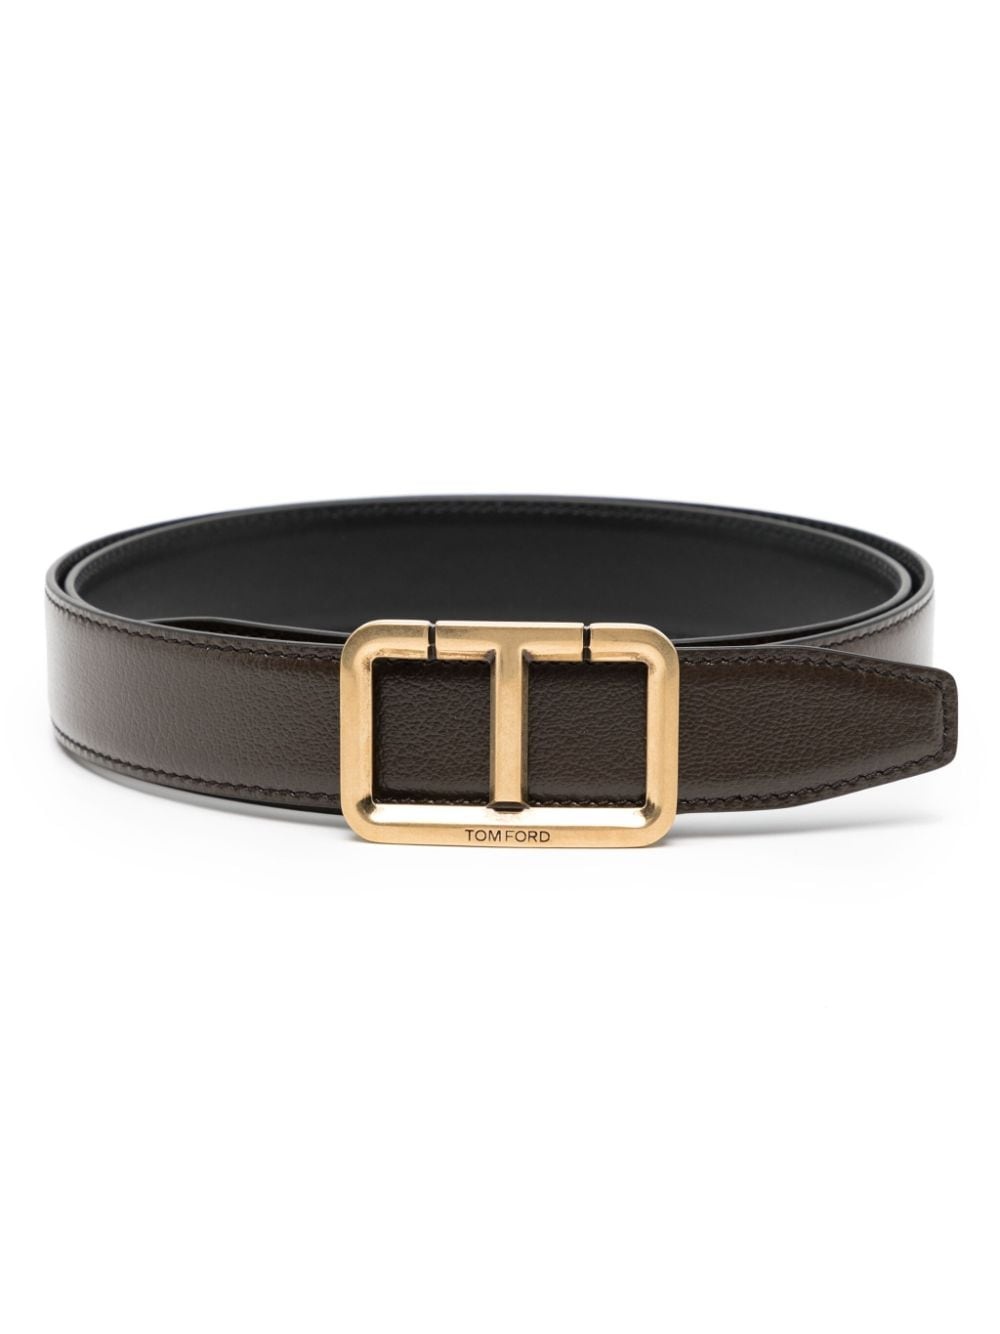 T-buckle leather belt - 1